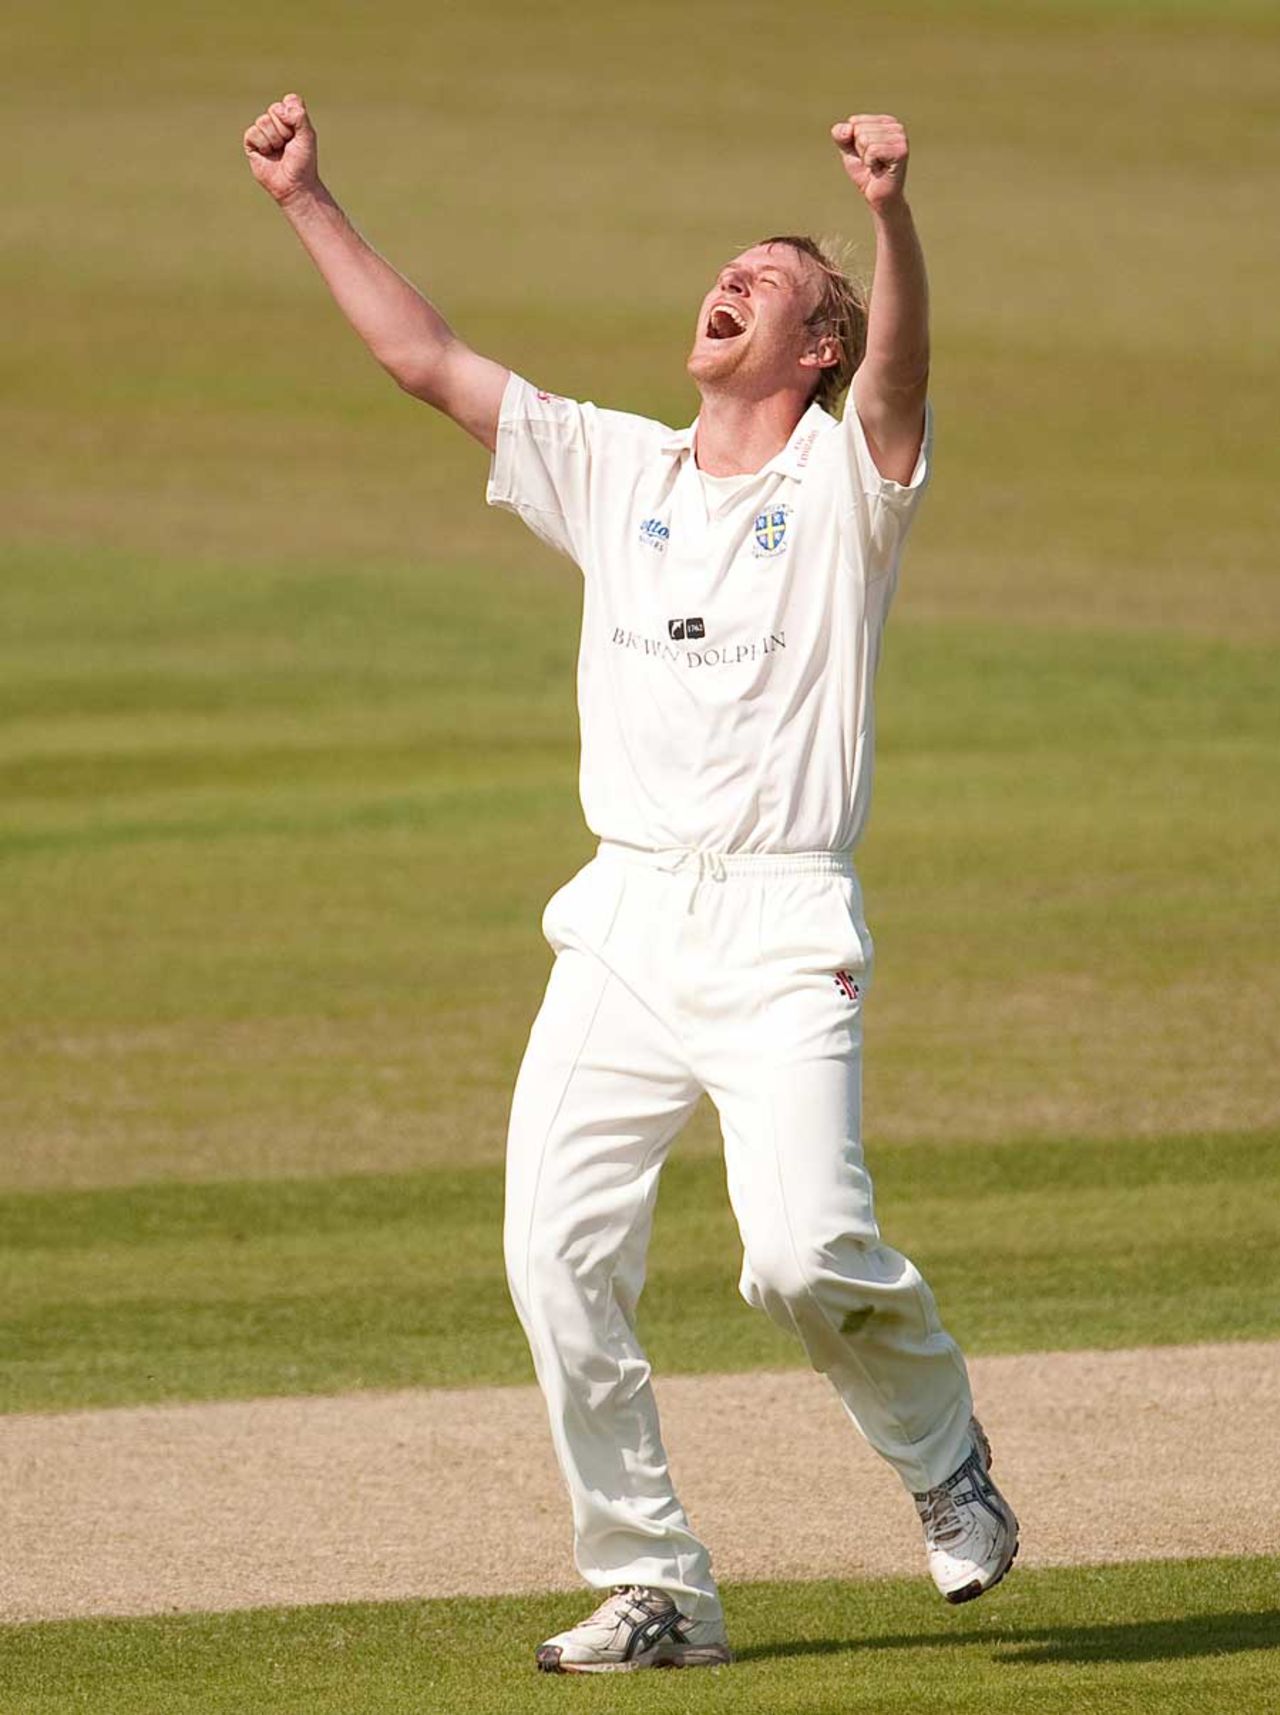 Mark Davies celebrates after Alex Hales was caught behind, Durham v Nottinghamshire, County Championship, Division One, Chester-le-Street, September 1, 2010